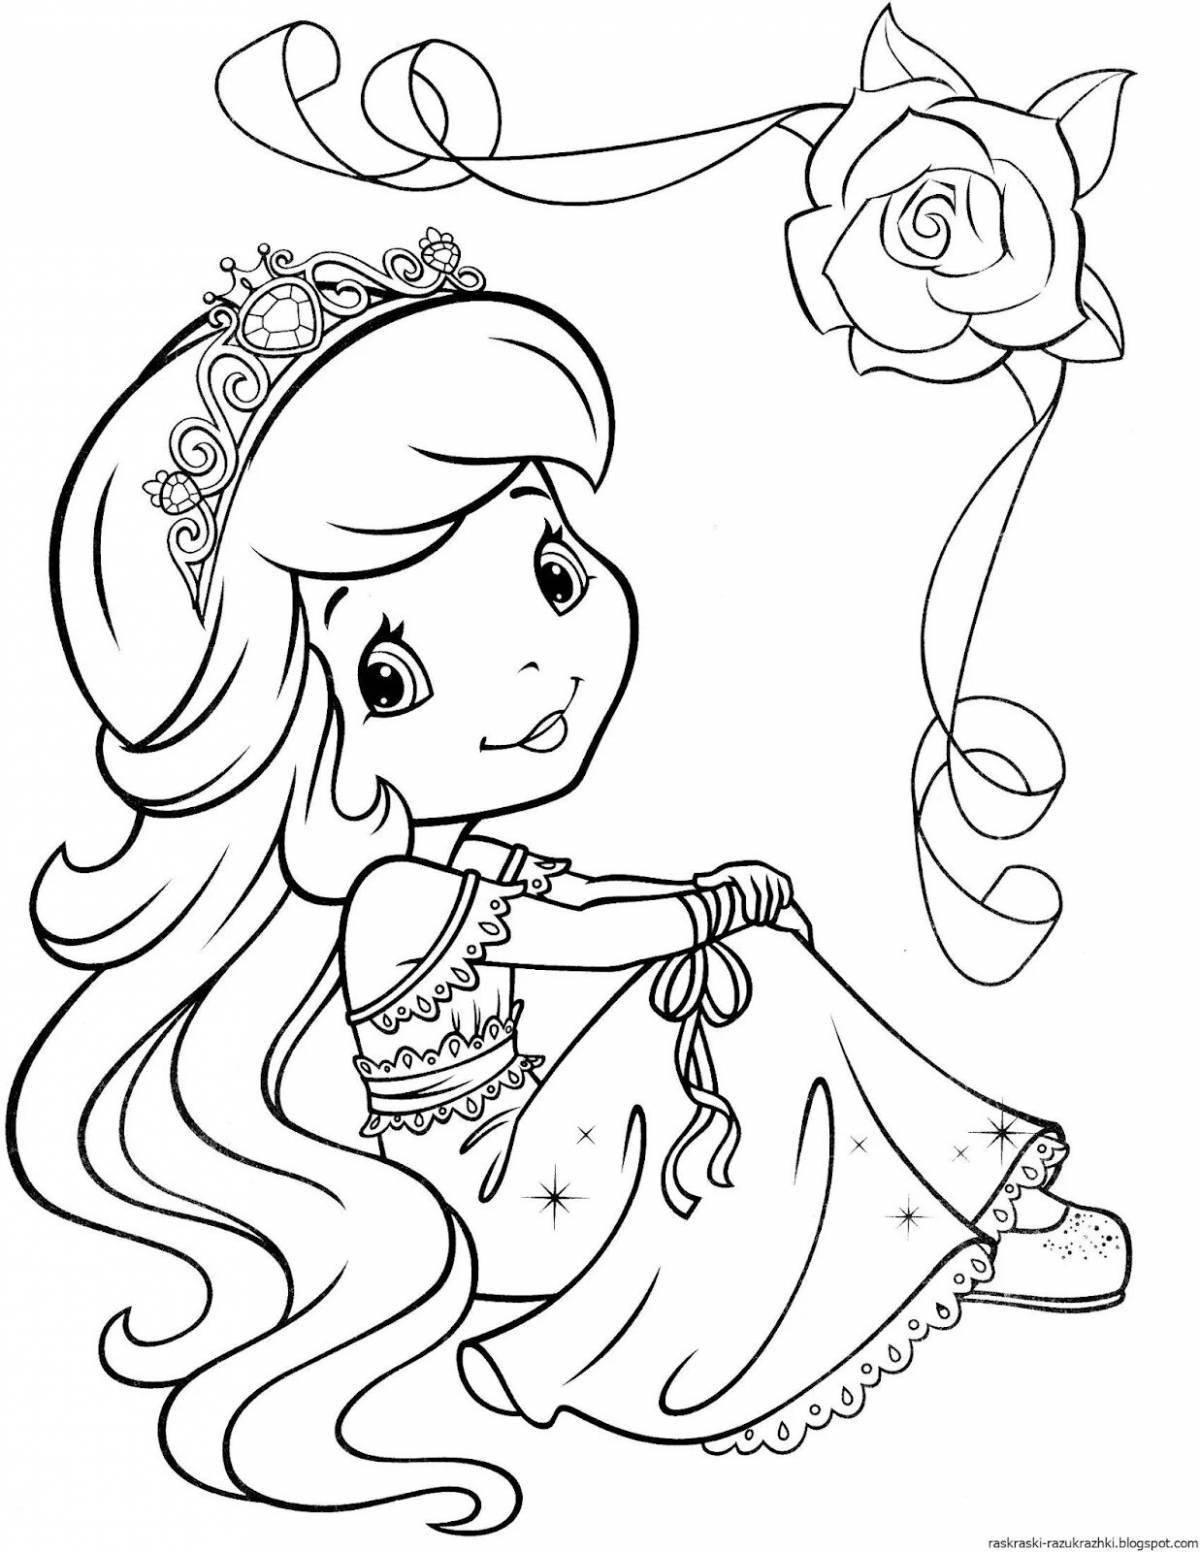 Colourful coloring for girls pdf